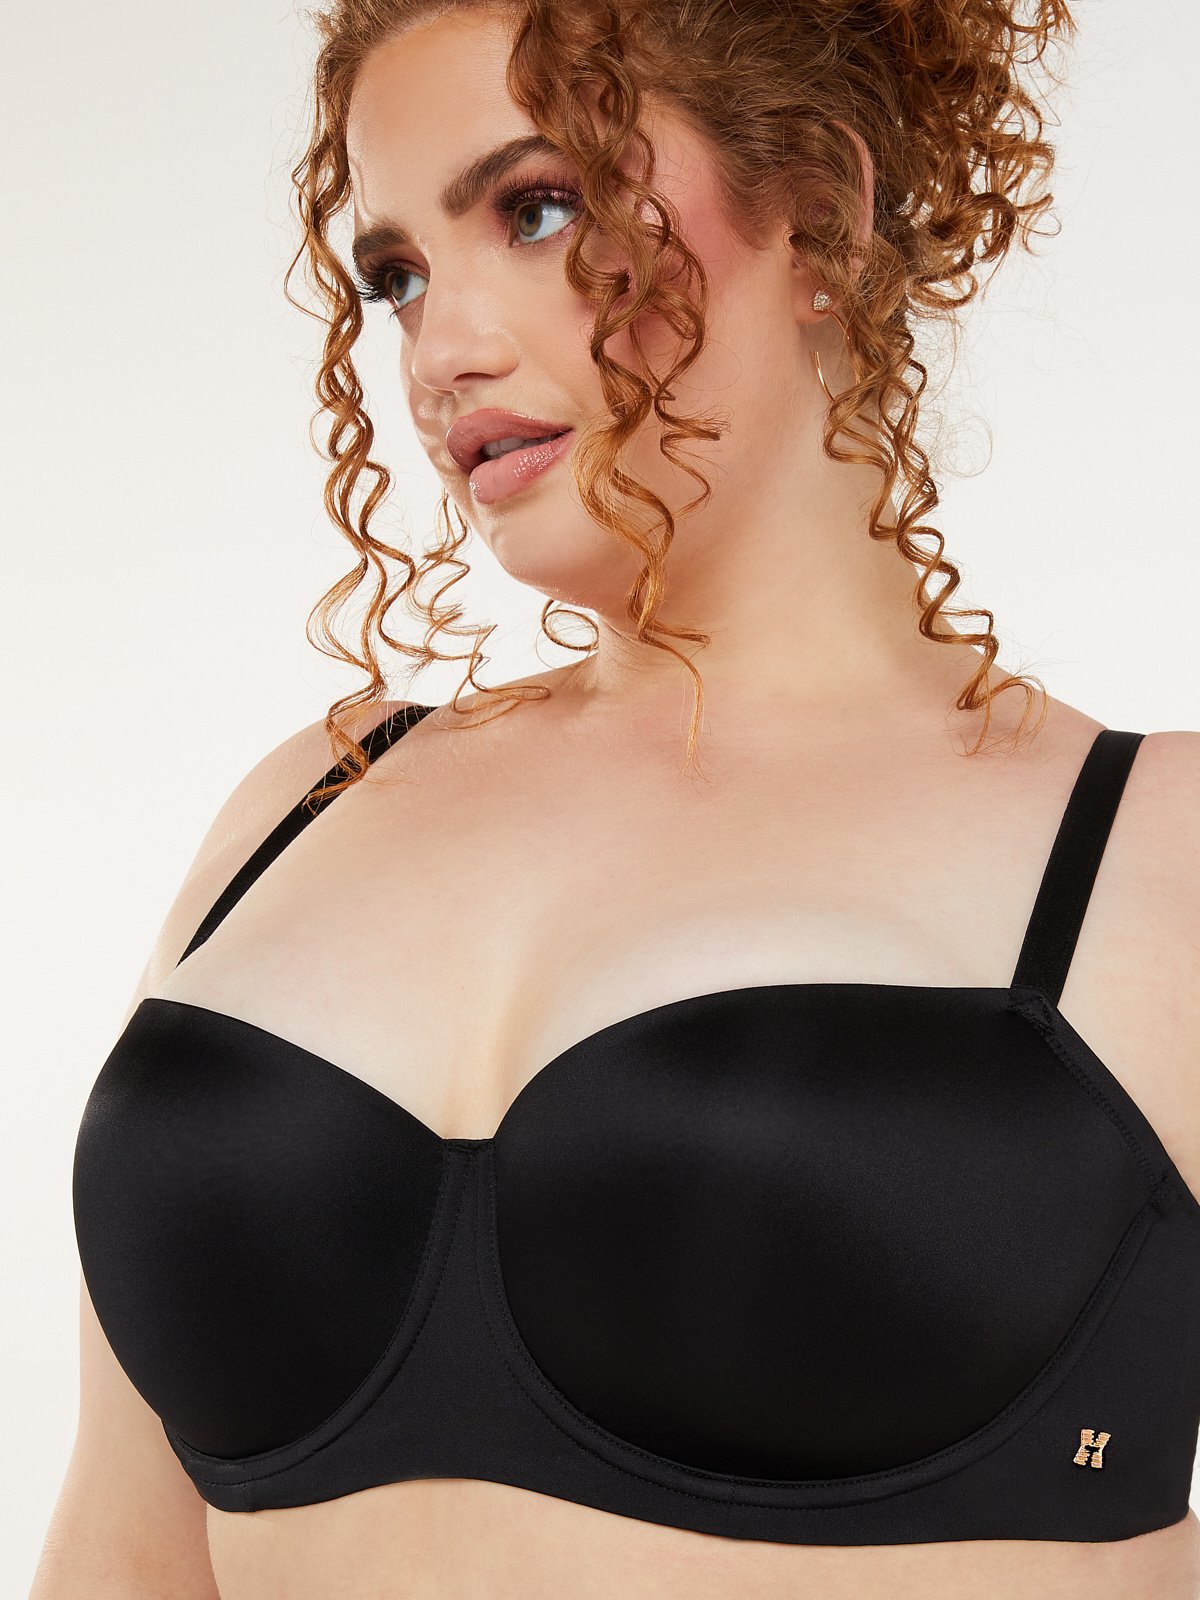 Buy online Black Solid Balconette Bra from lingerie for Women by Prettycat  for ₹439 at 37% off